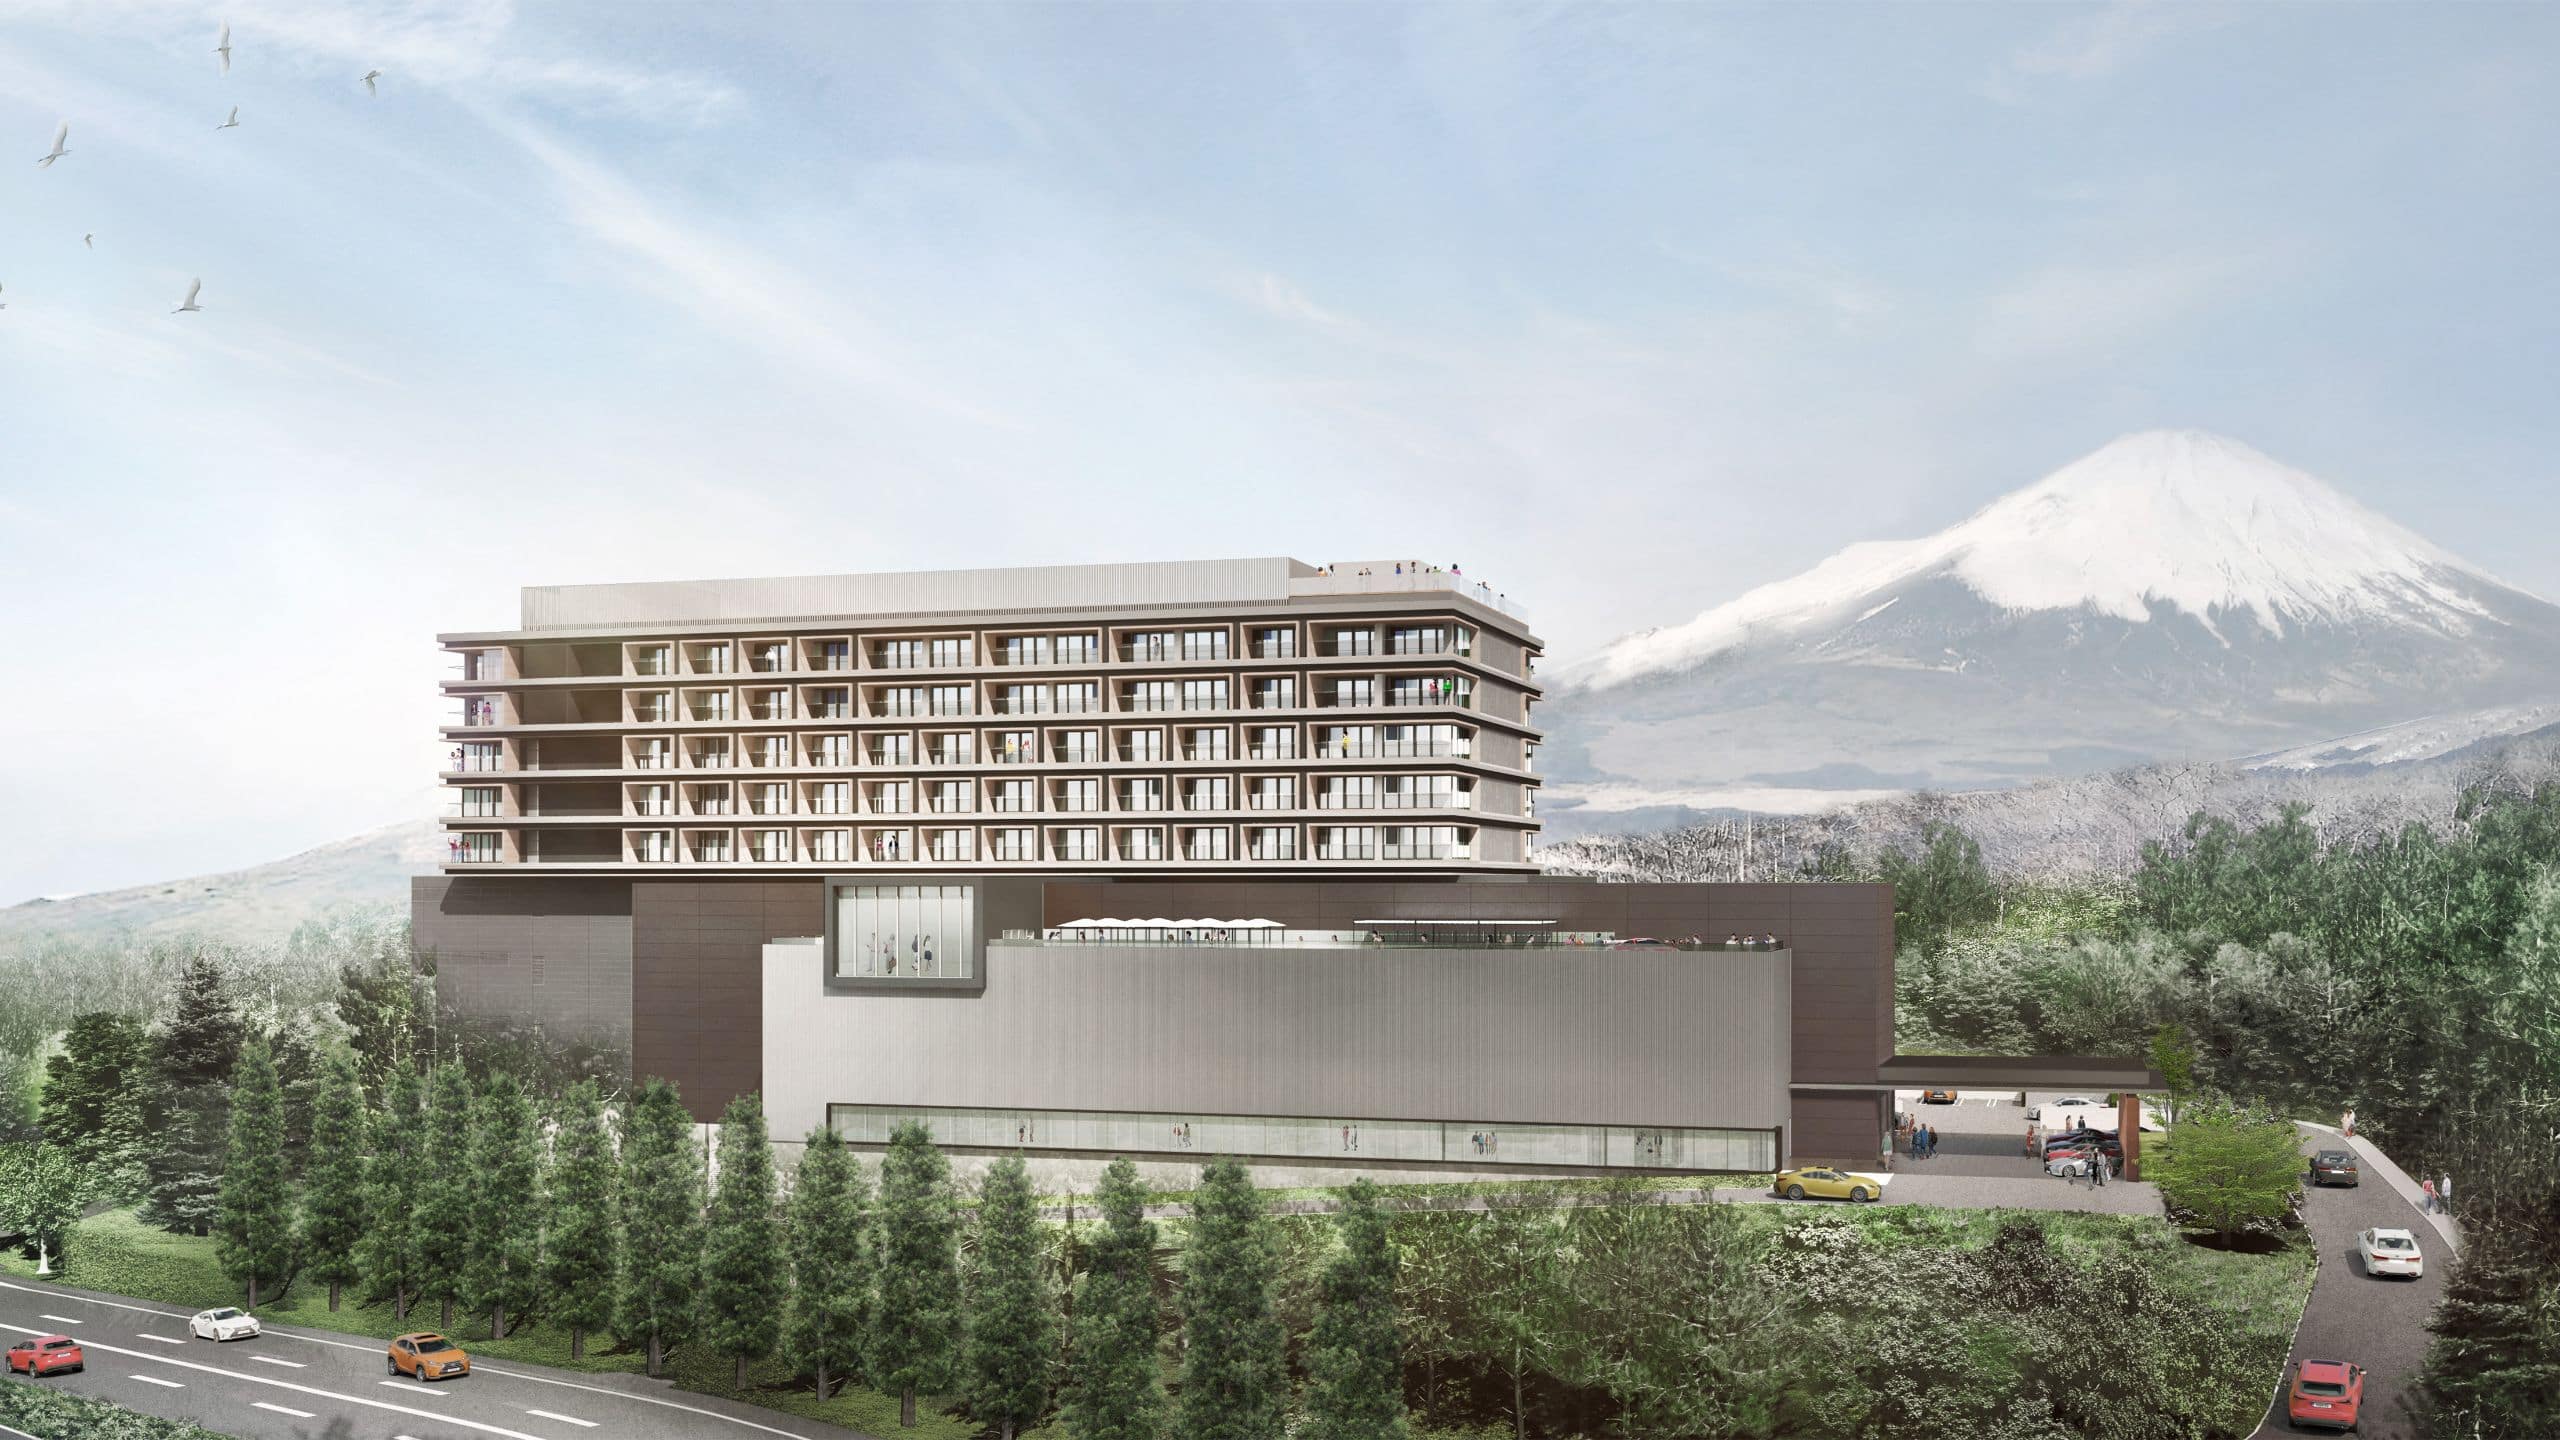 The Excitement Of Motorsports Meets Luxury Hospitality Fuji Speedway Hotel